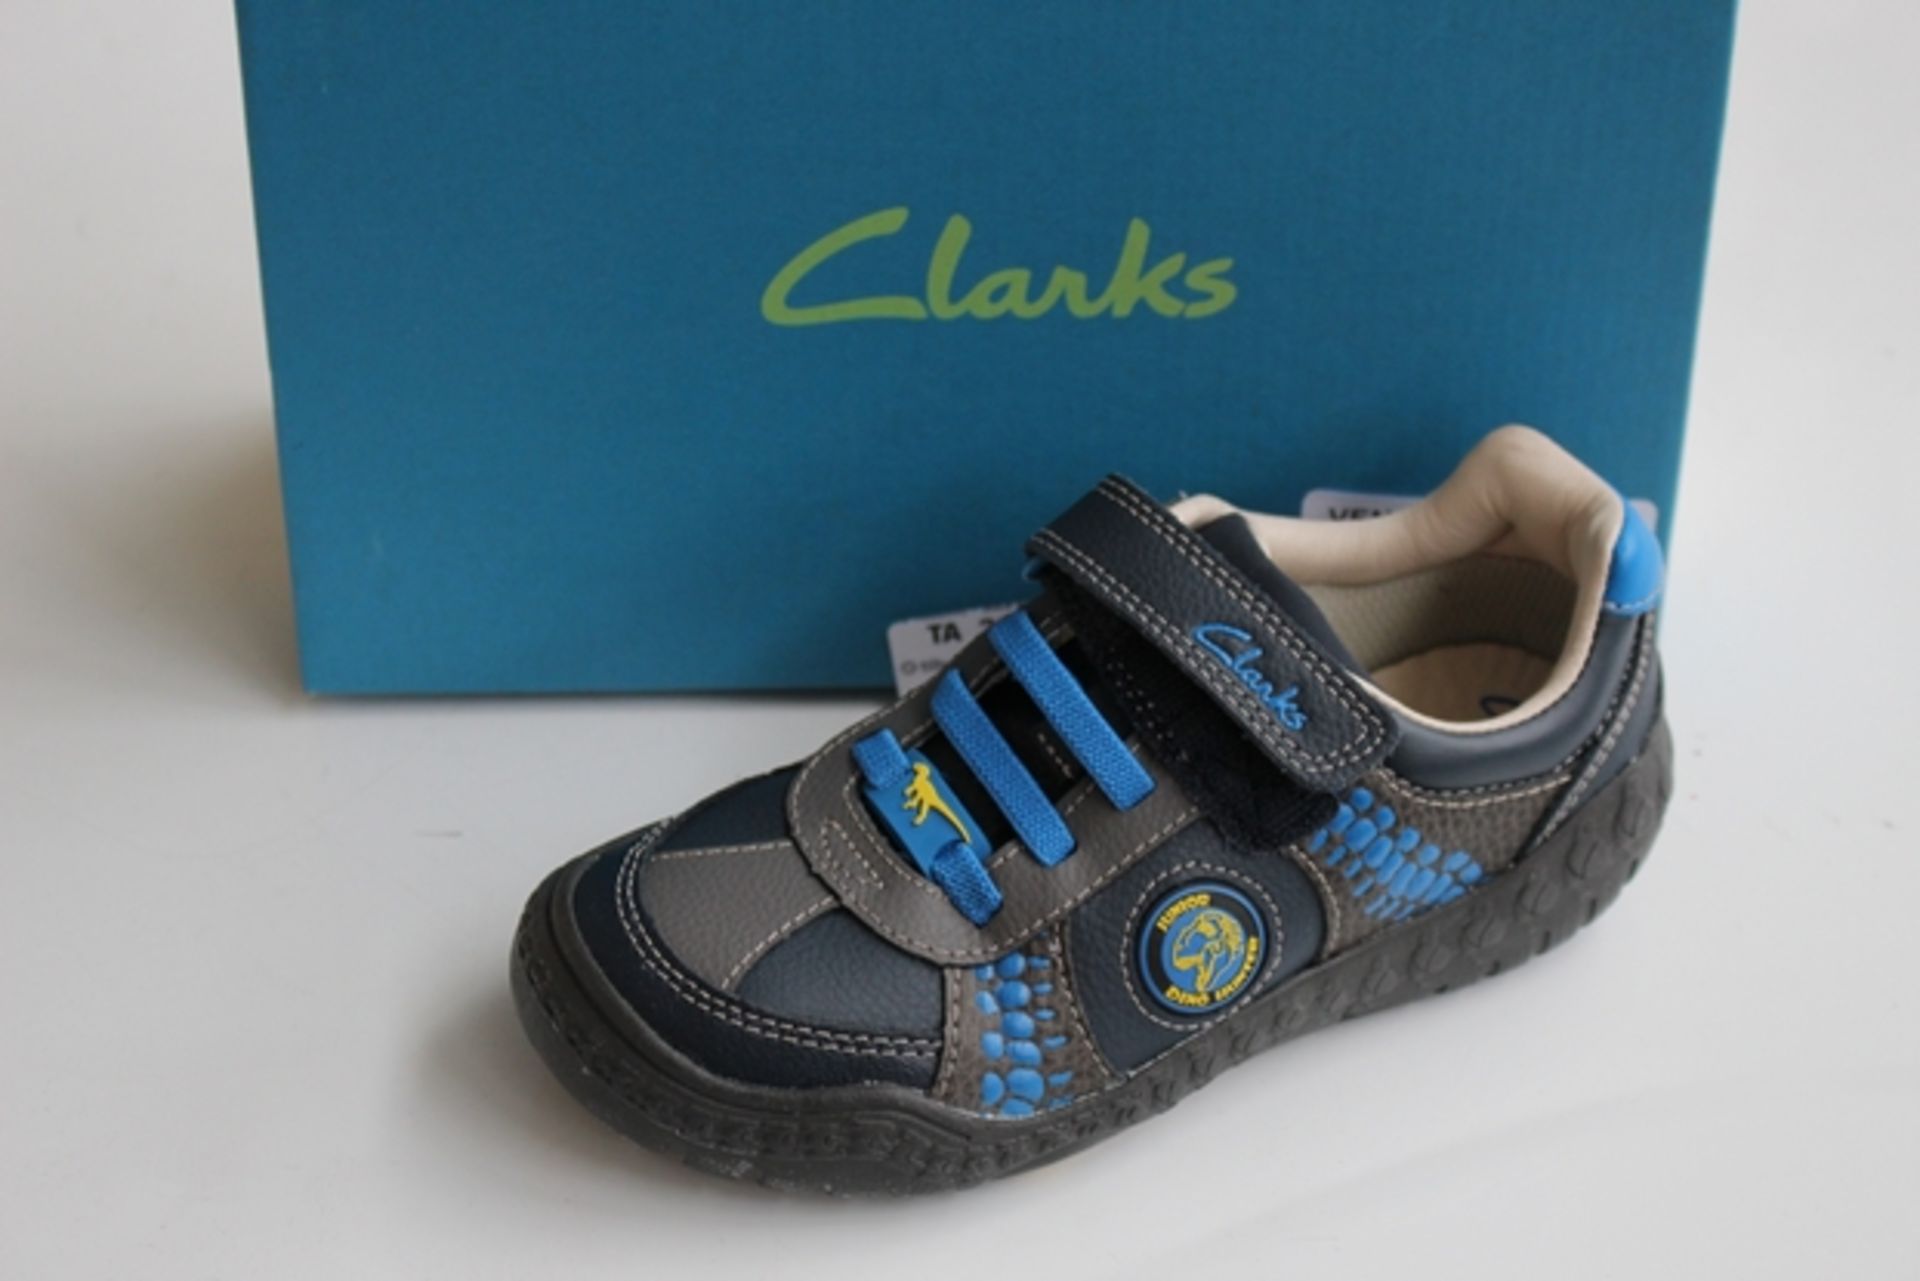 1X BOXED UNUSED PAIR OF CLARKES CHILDREN'S SHOES SIZE 10.5E (DS-TLH-B) (36.115)